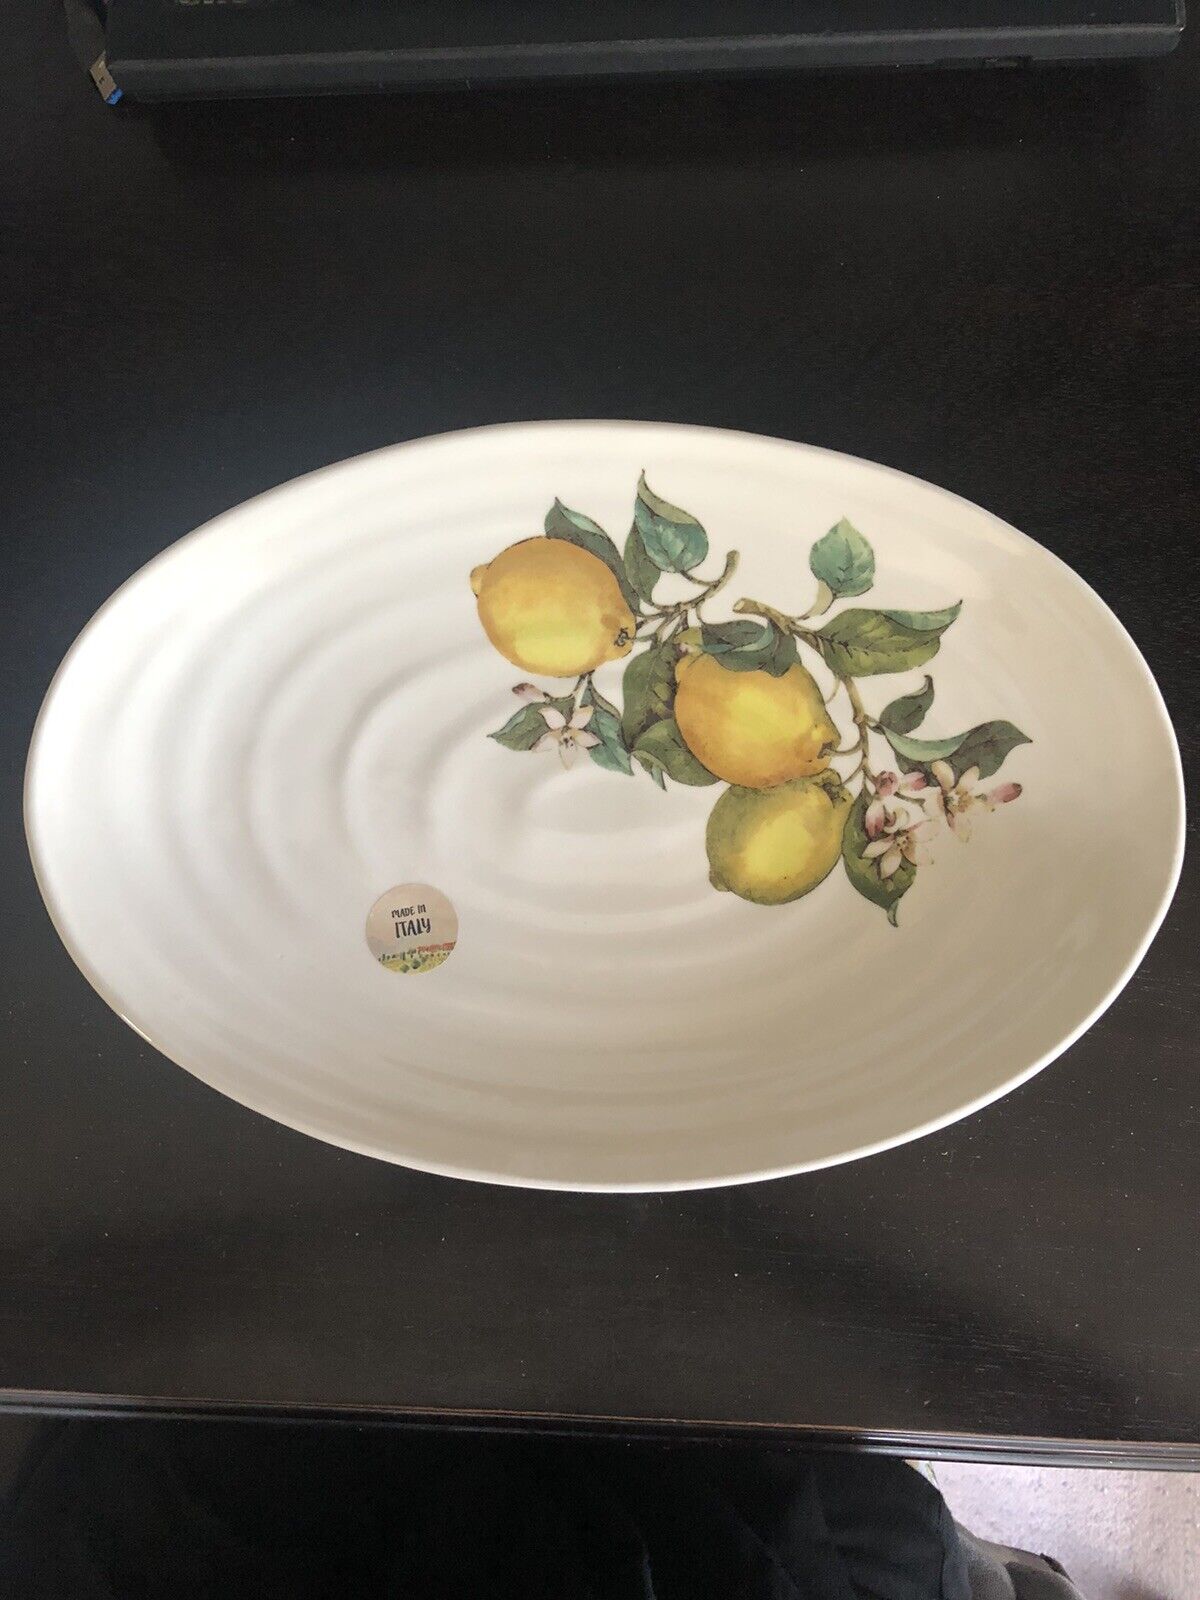 Ceramica Cuore Limone Large Oval Platter Serving Plate Tray 13”x9” Italian NWT